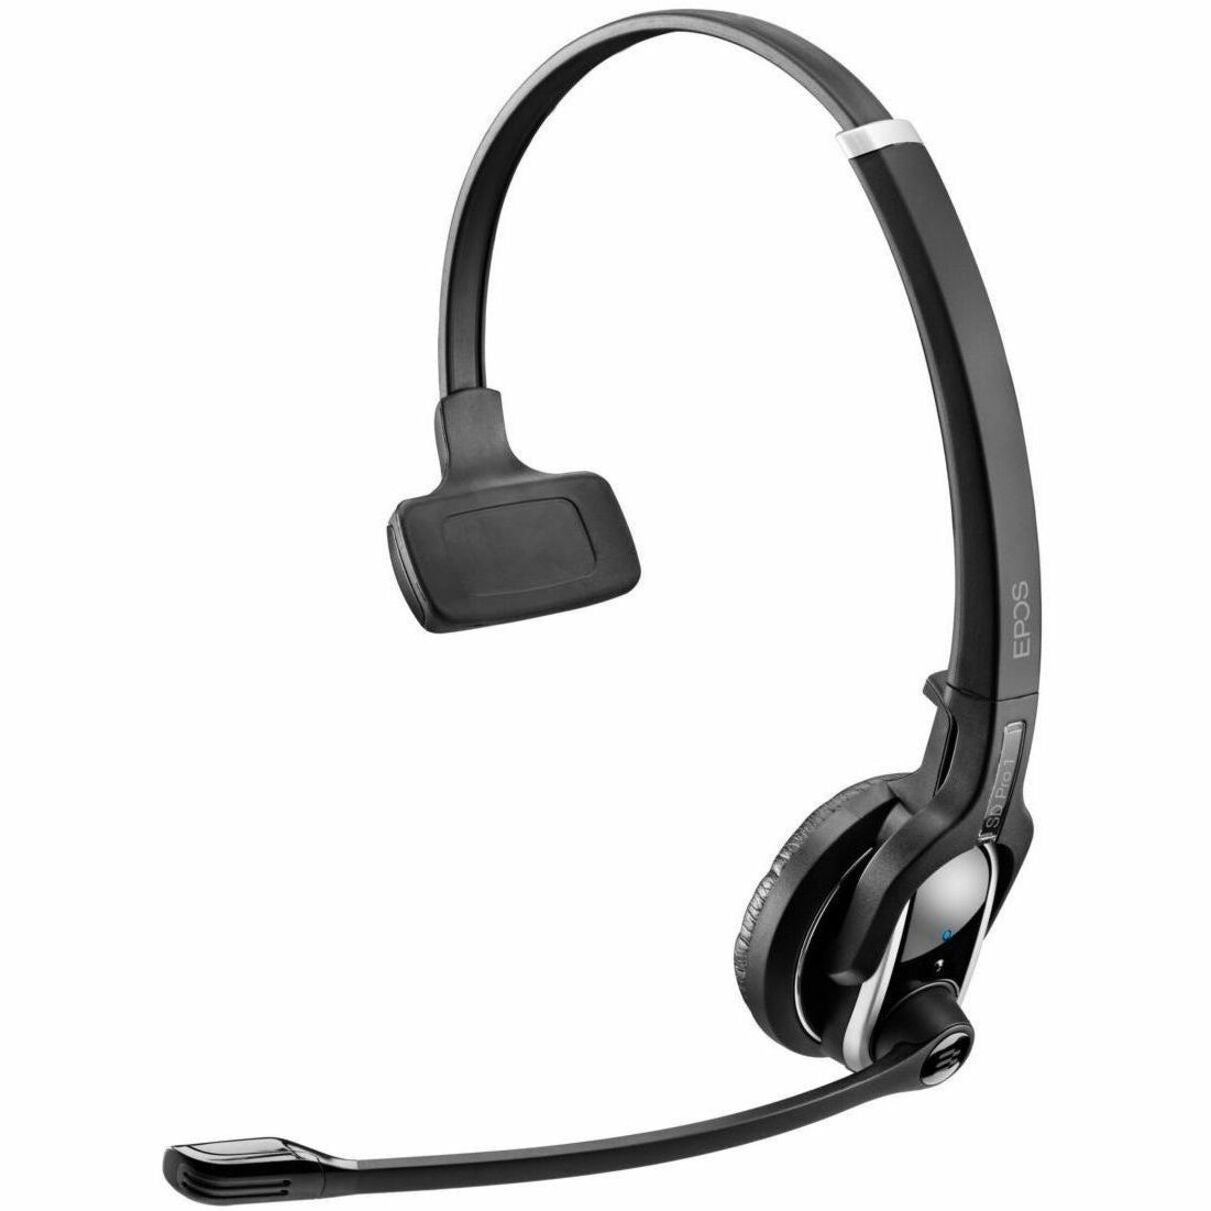 EPOS | SENNHEISER 1000562 IMPACT SD 20 ML - US Headset, Wireless DECT Mono Headset with Rechargeable Battery, Noise Cancelling Microphone, and 590.6 ft Wireless Operating Distance